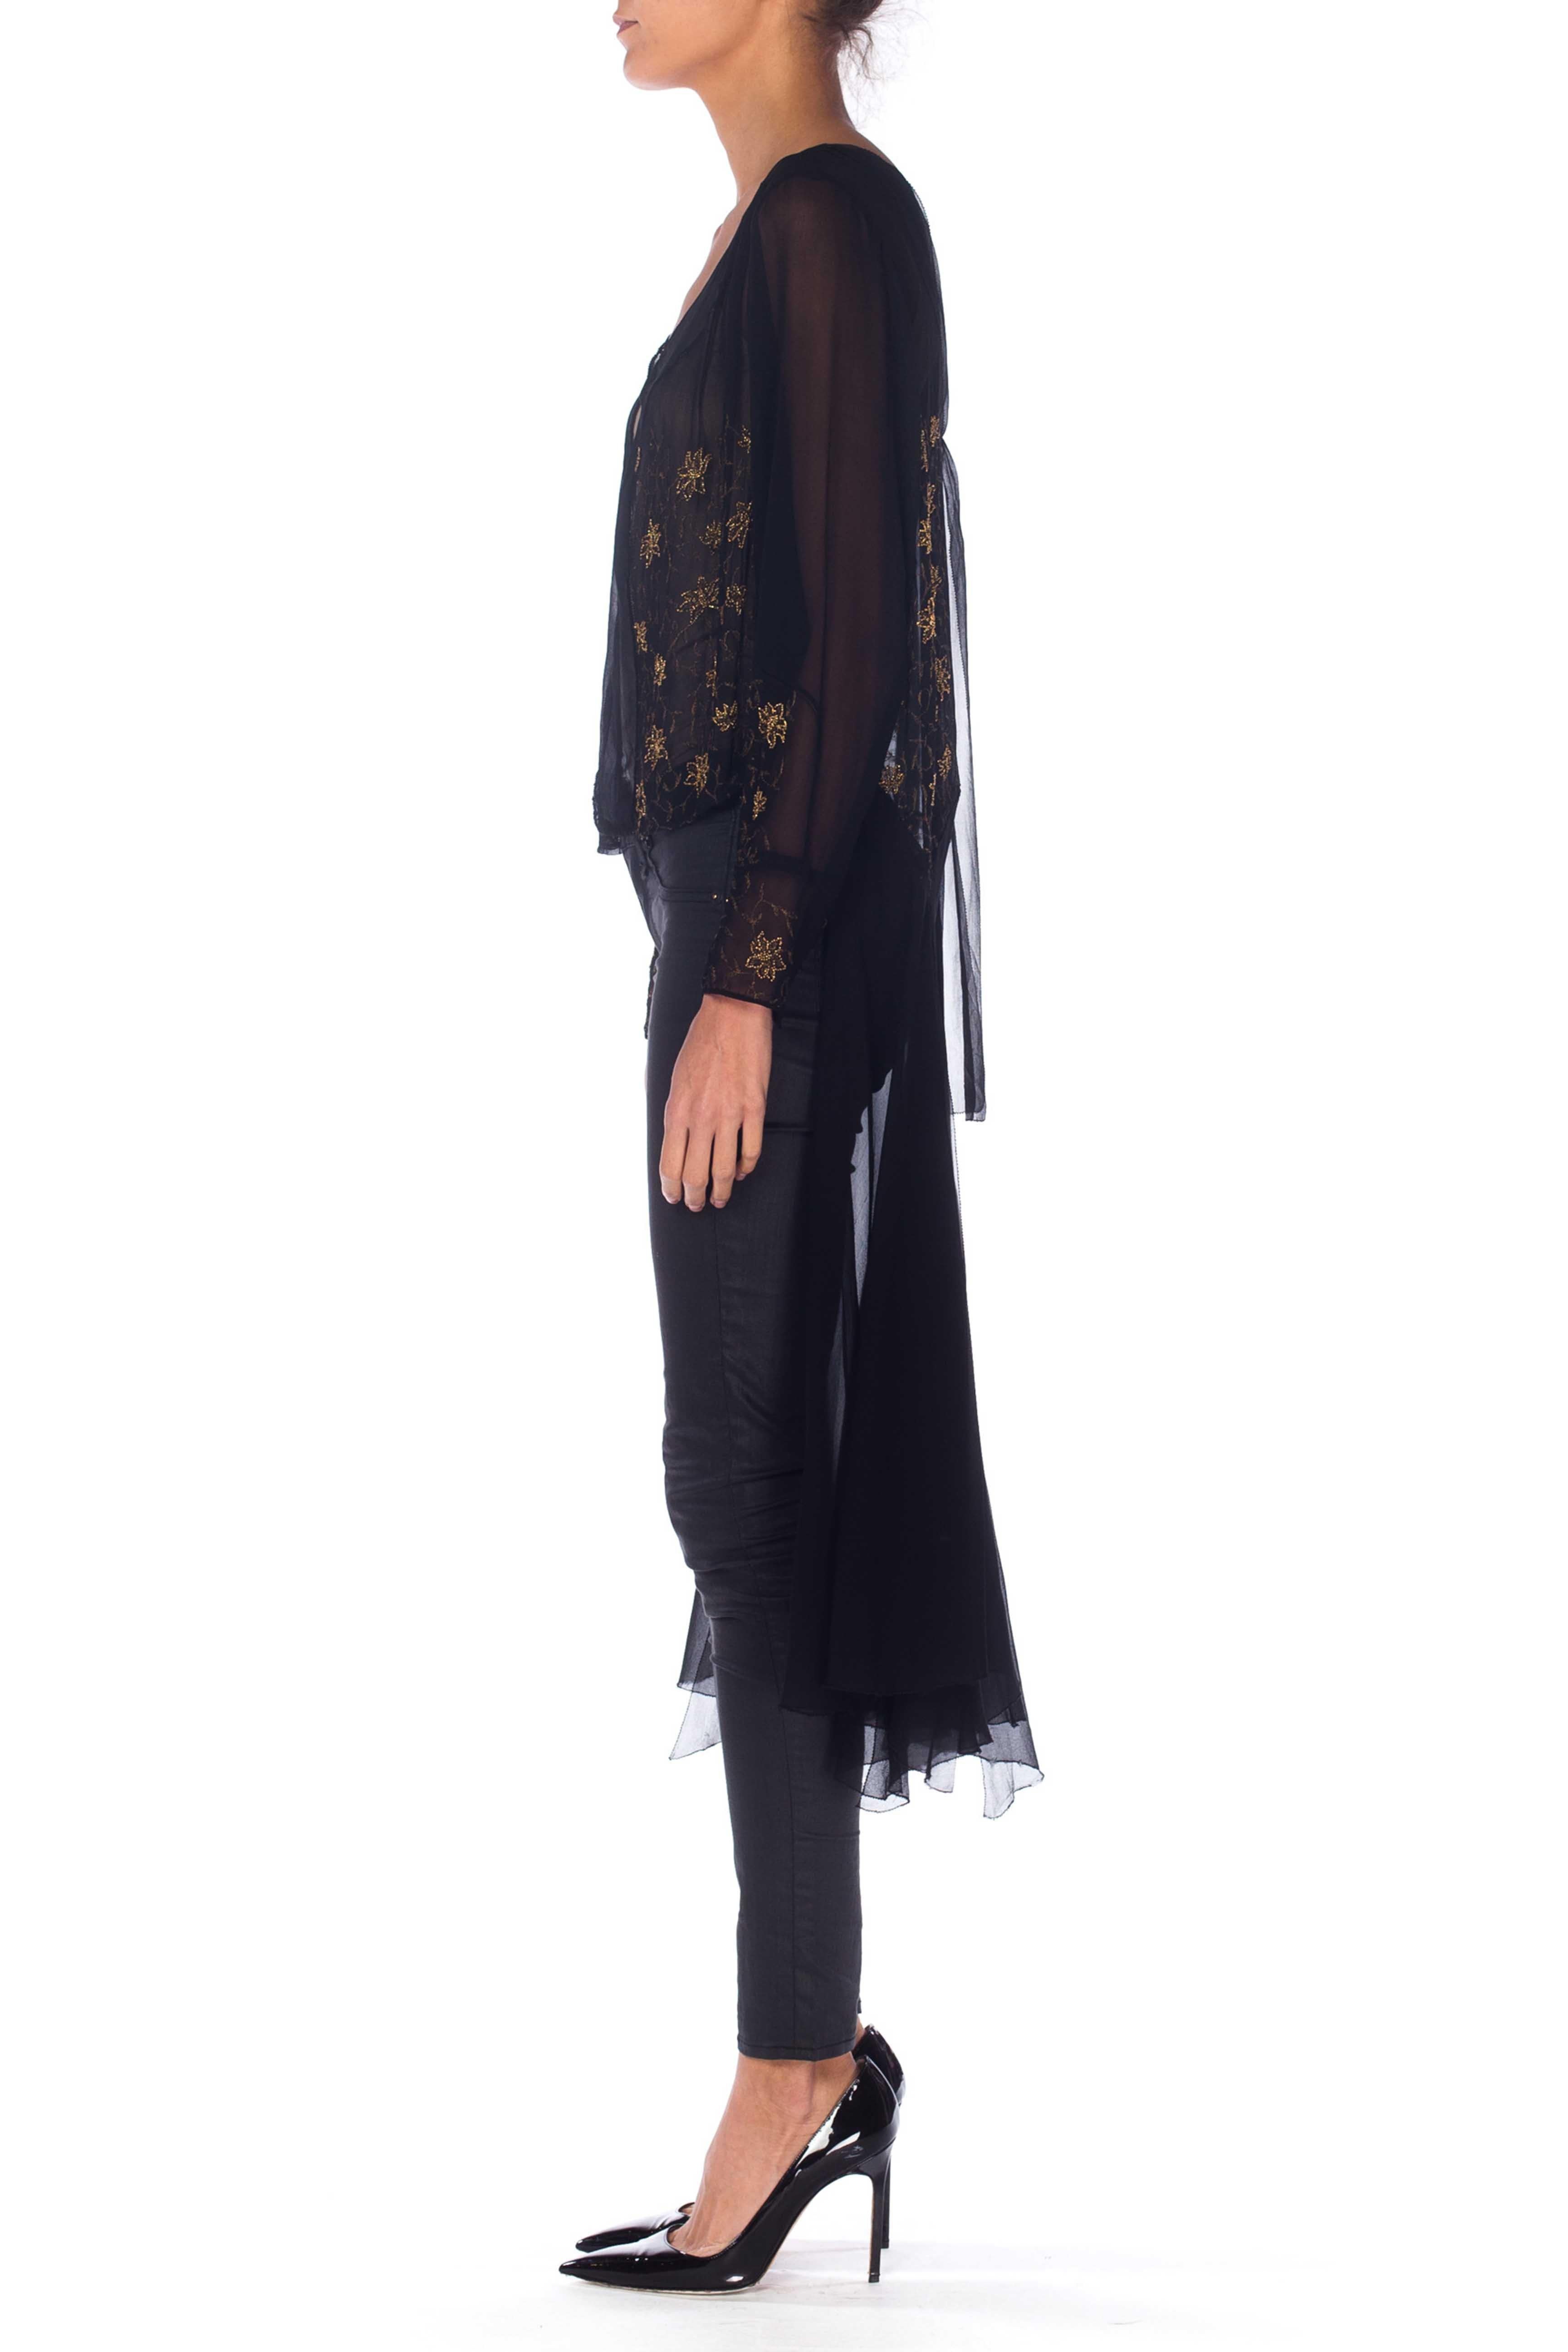 Women's 1920S Black Silk Chiffon Over Dress With Gold Embroidery & Beading For Sale